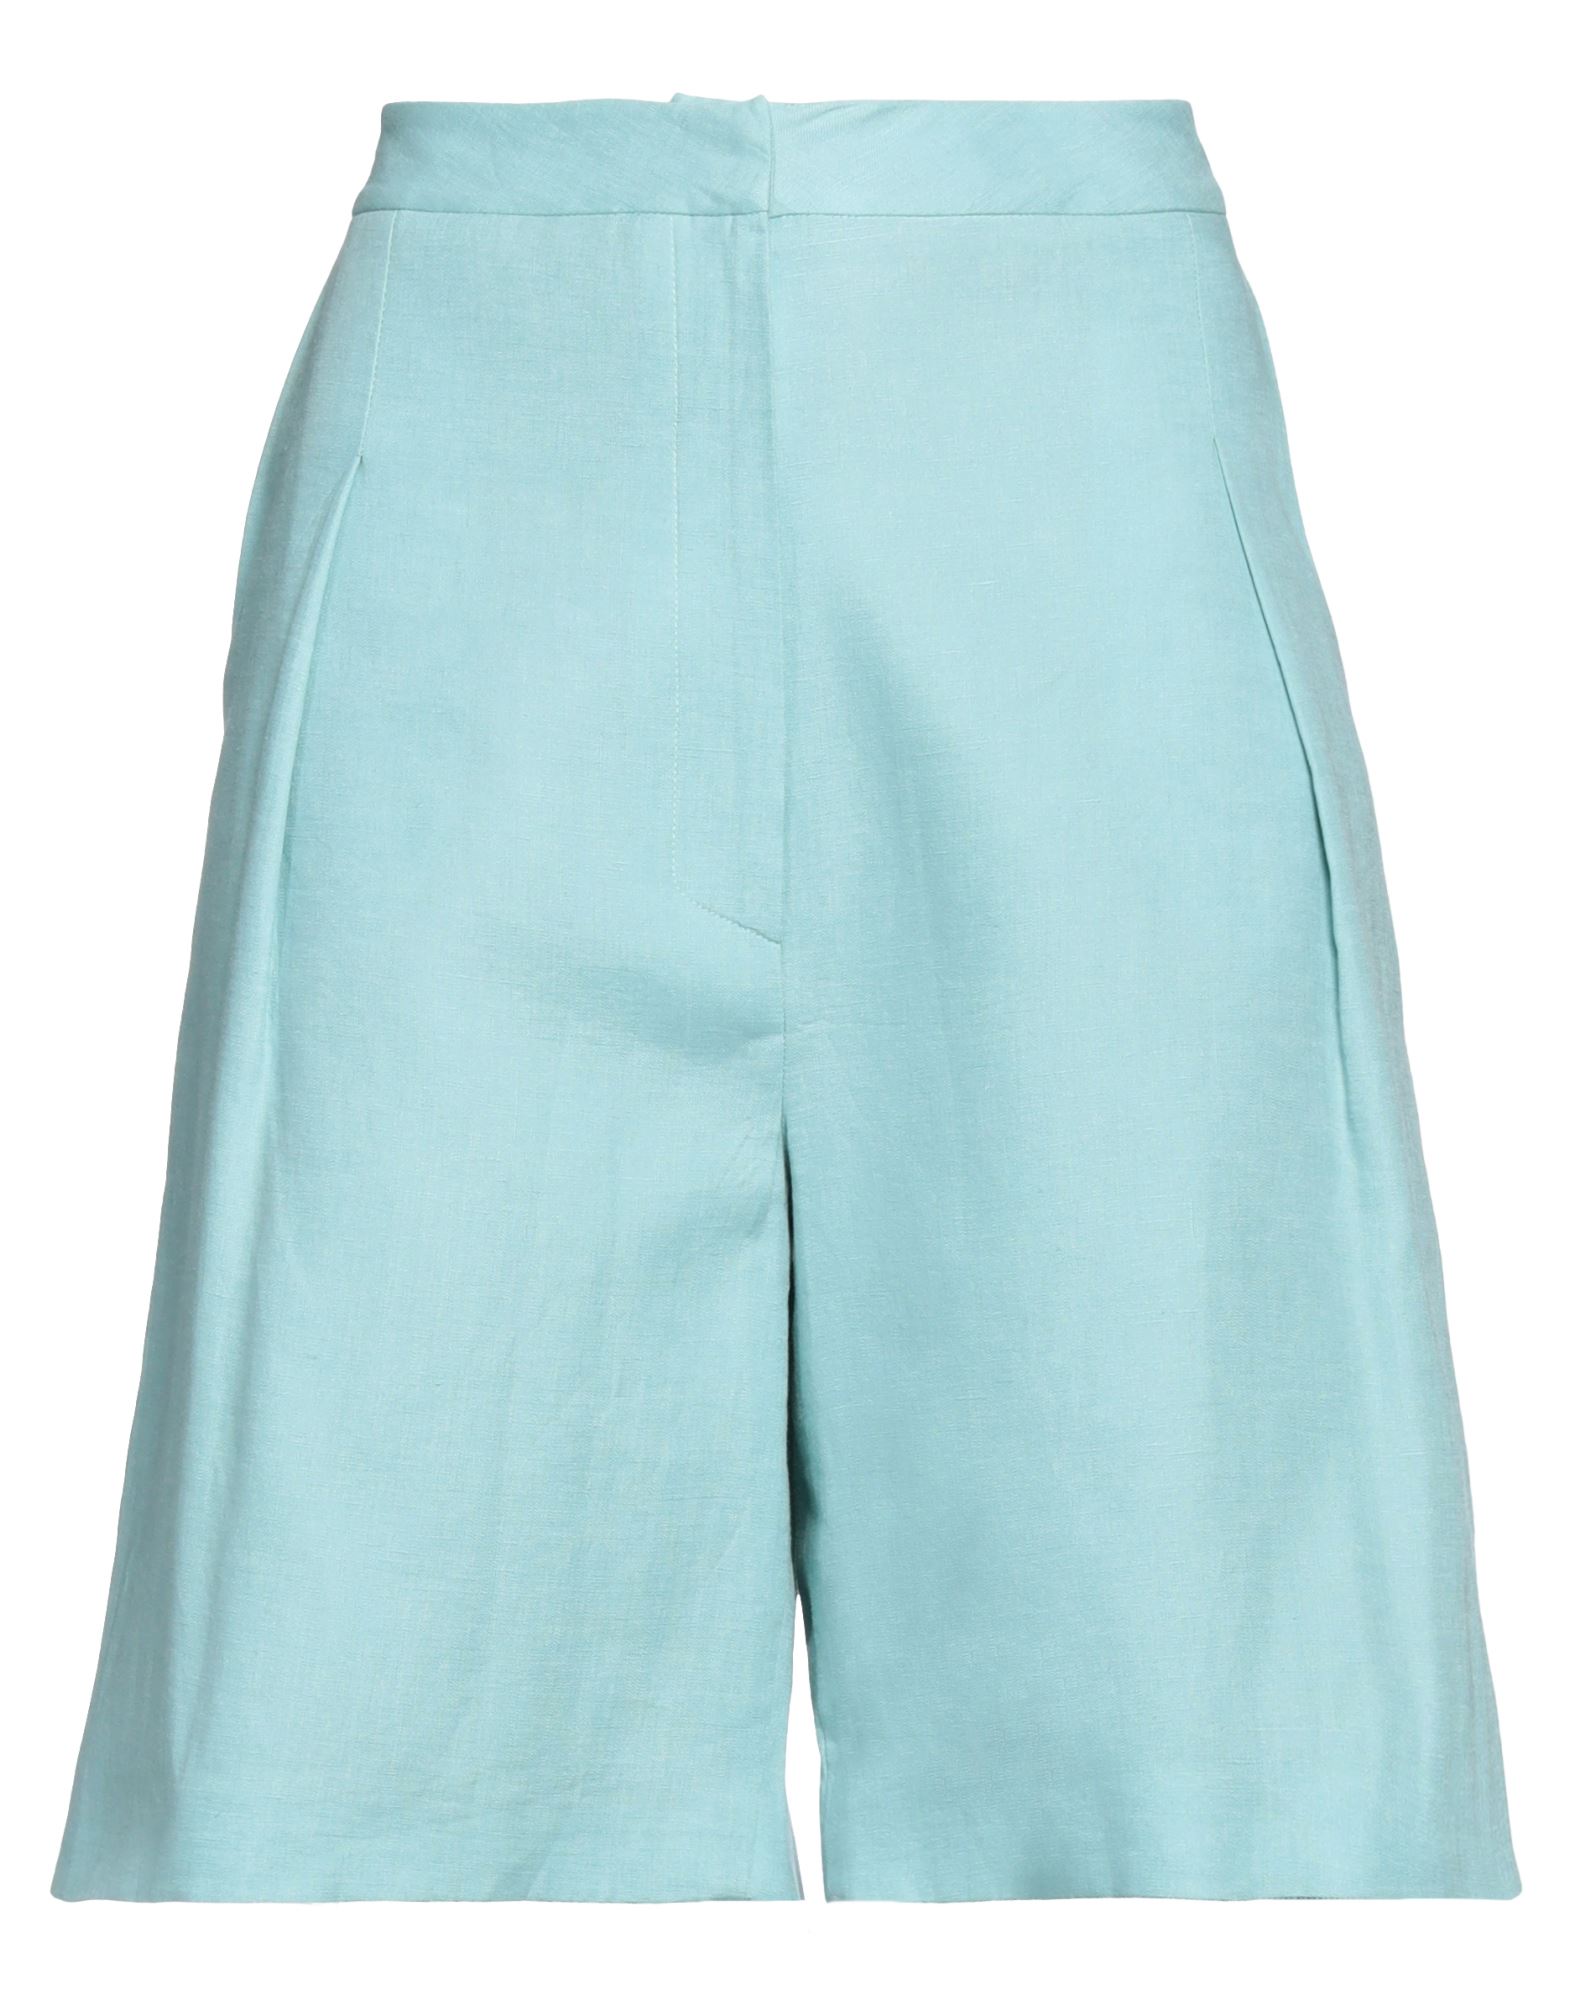 IN THE MOOD FOR LOVE Shorts & Bermudashorts Damen Himmelblau von IN THE MOOD FOR LOVE